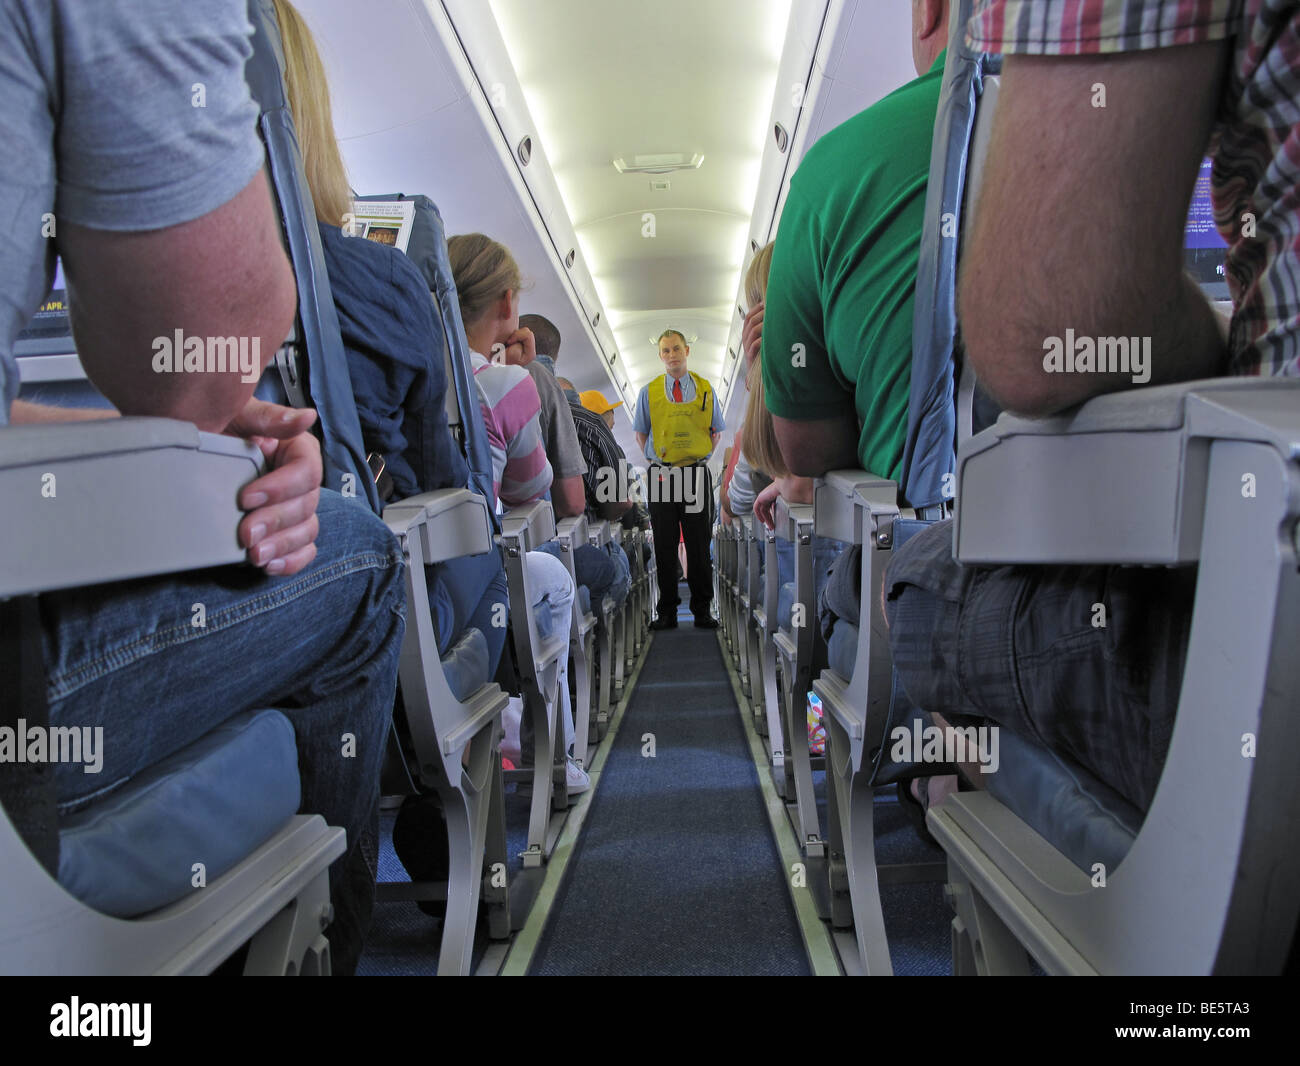 A flight attendant or steward gives safety instructions during a Flybe flight from Guernsey to London Gatwick Stock Photo